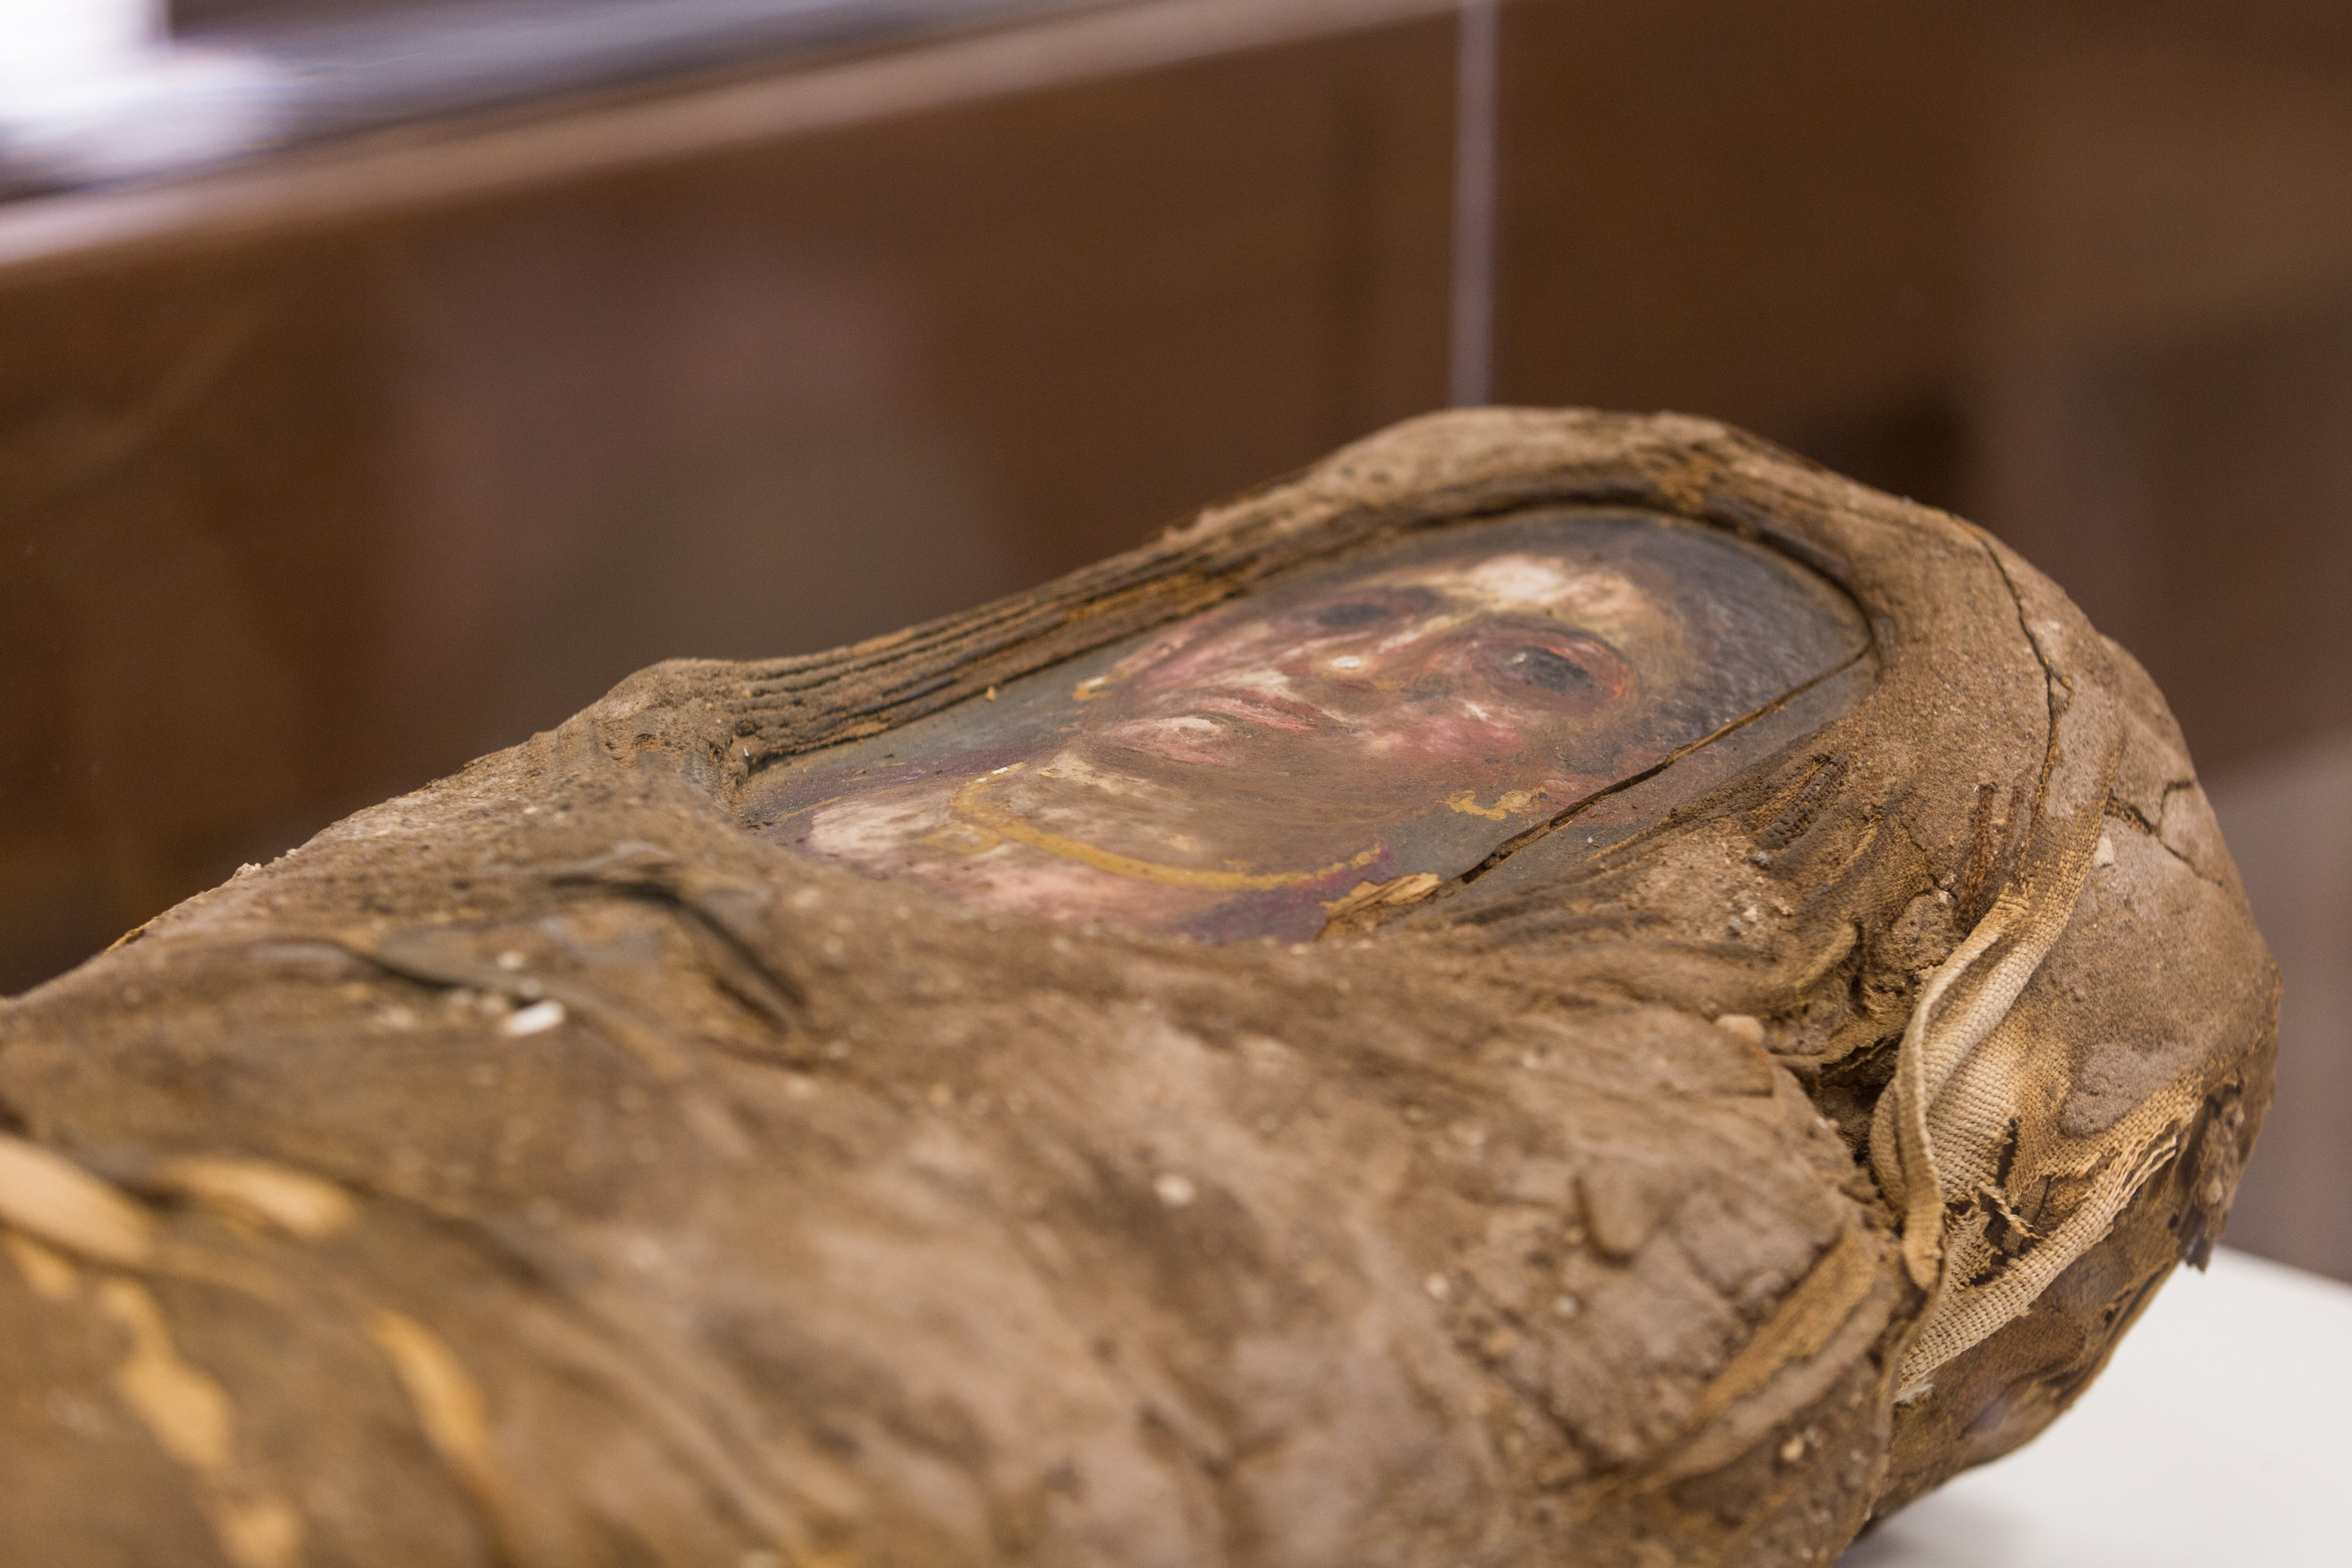 First-of-its-kind mummy study reveals clues to girl's story